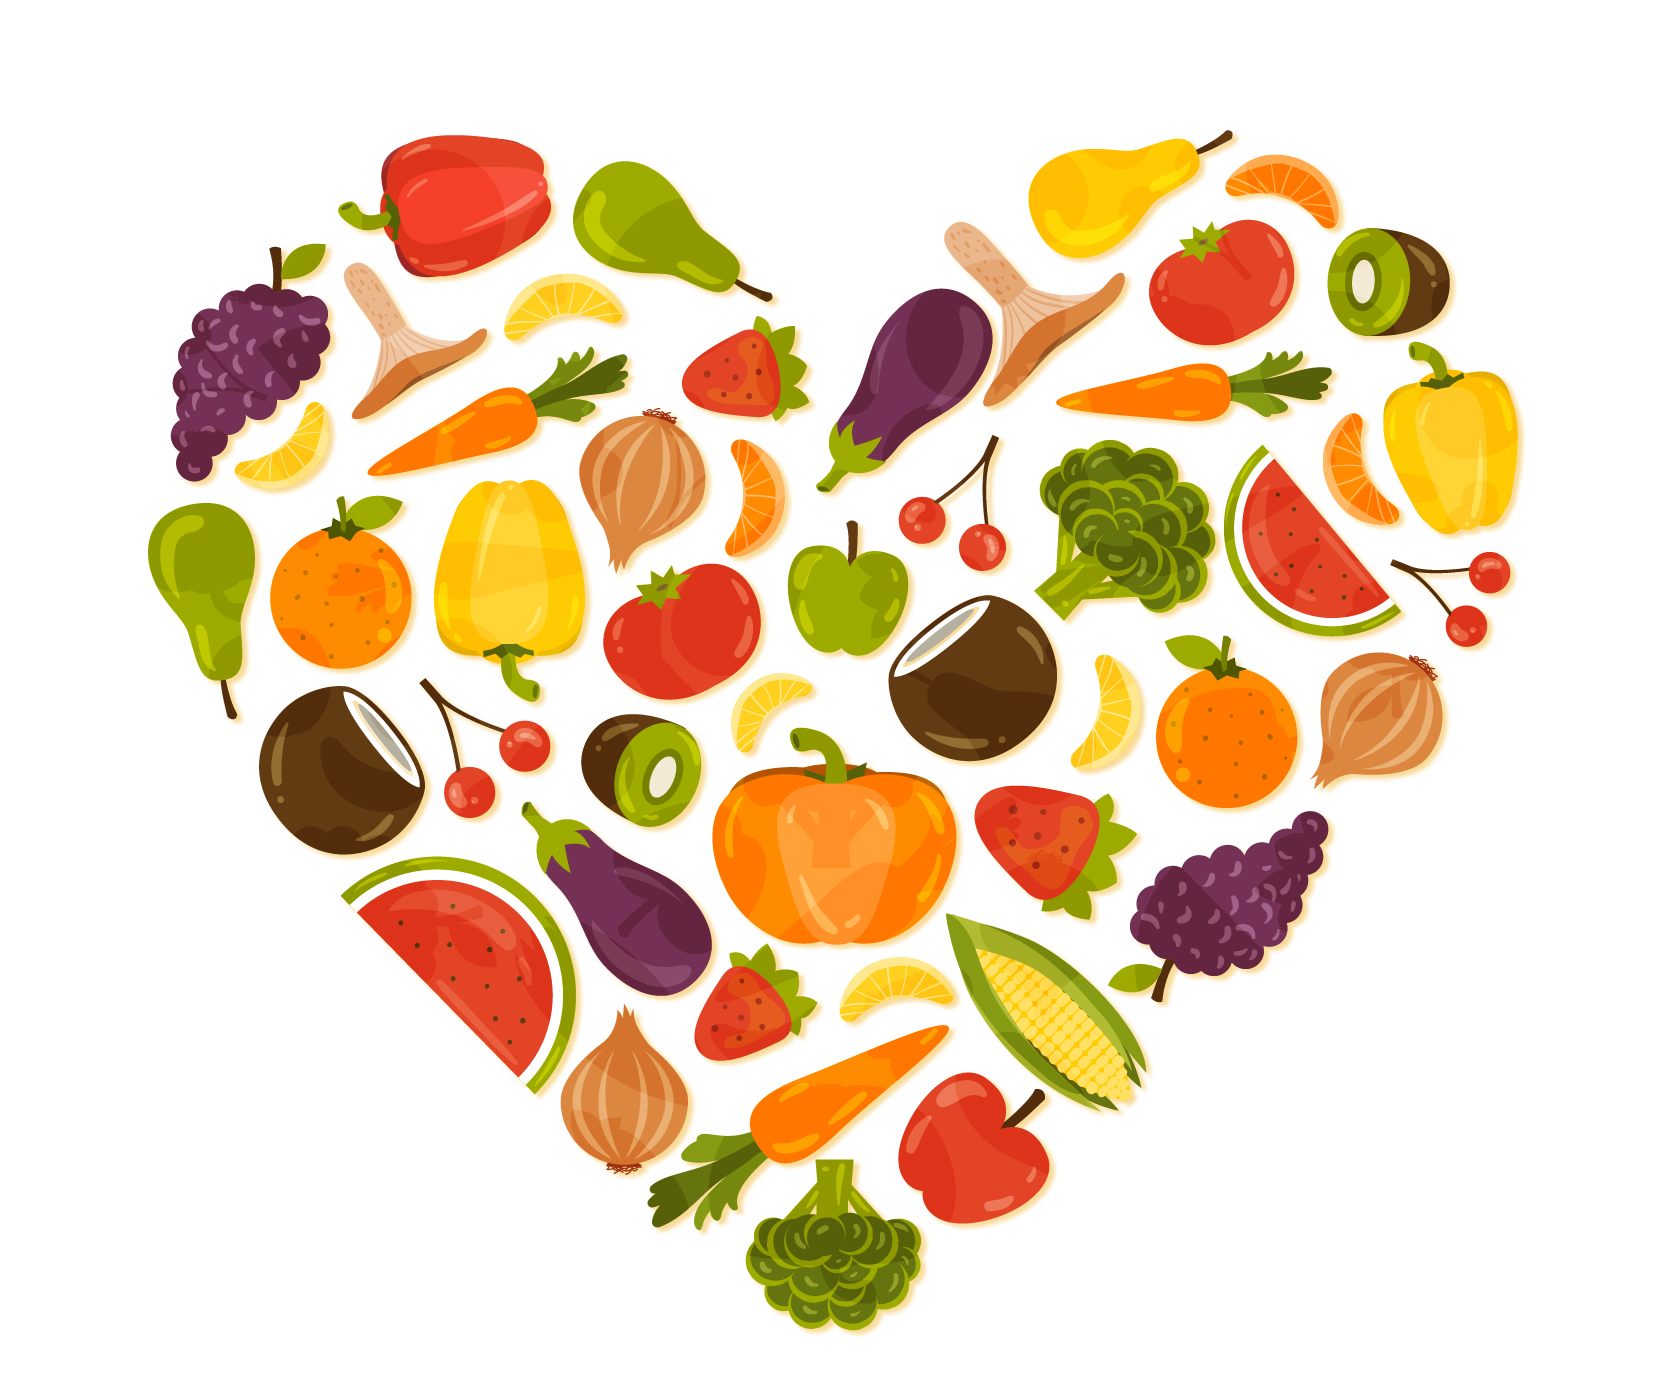 fruits and vegetables clipart - photo #44